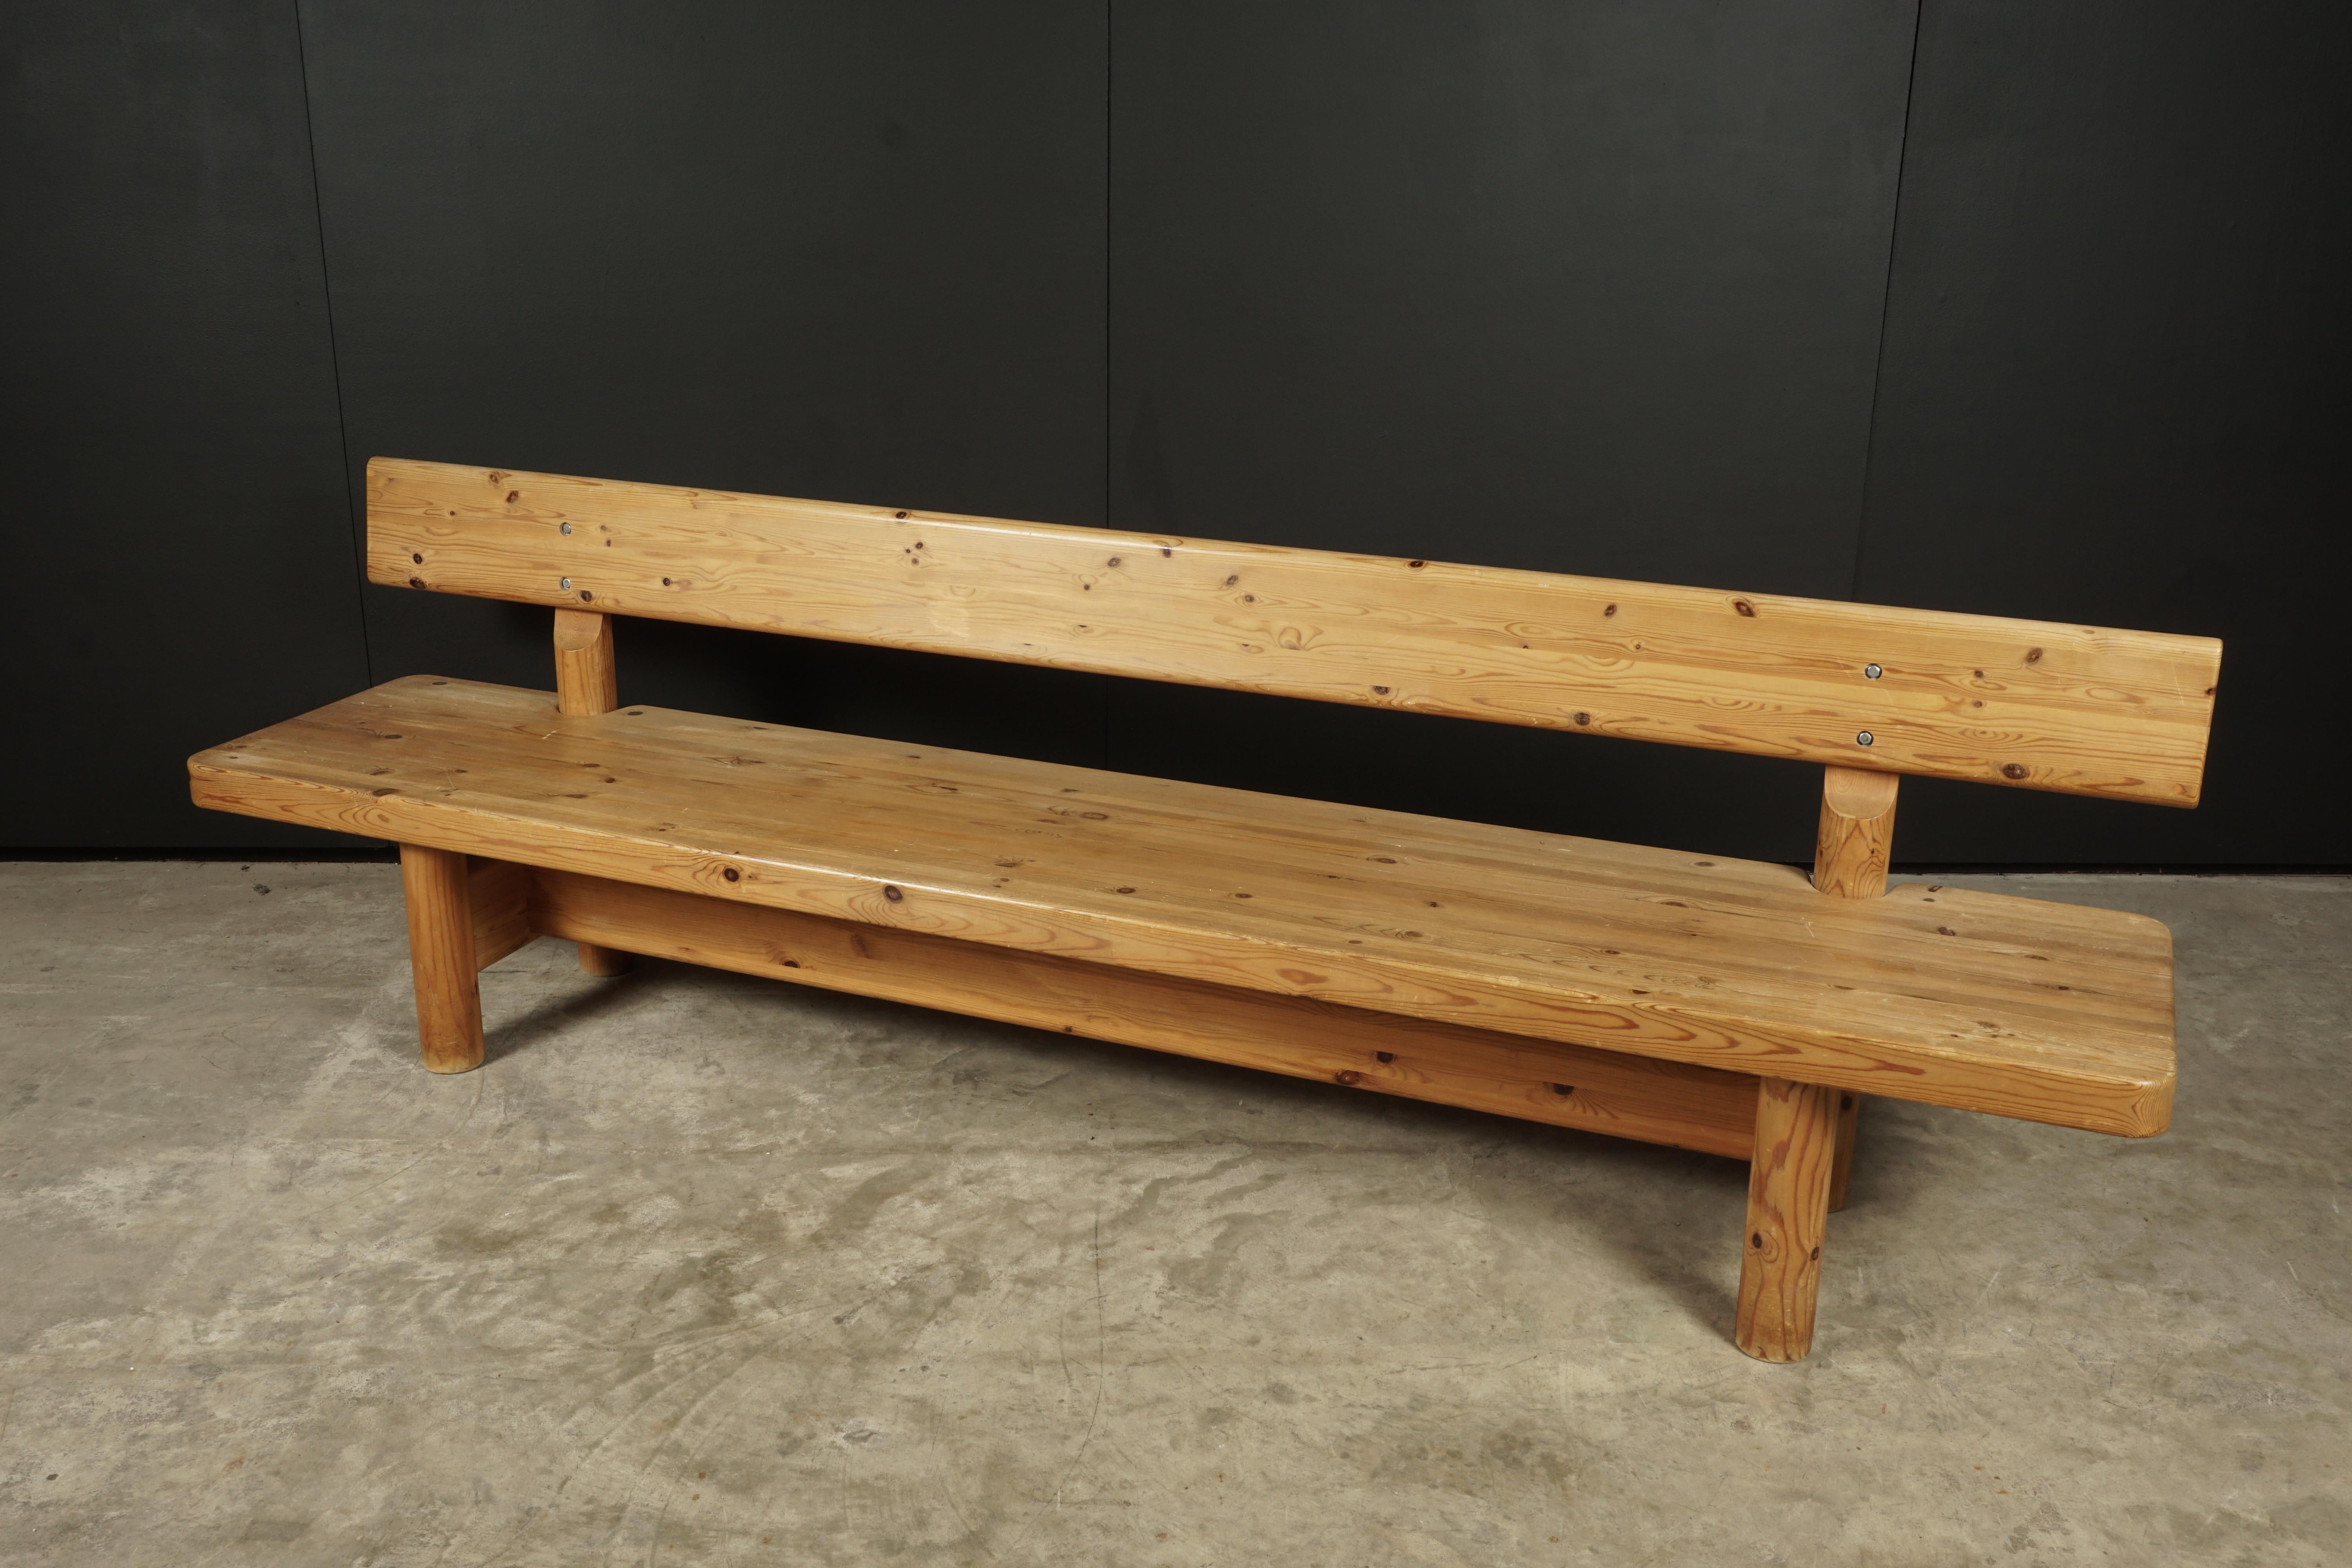 Vintage large bench designed by Rainer Daumiller, Denmark, 1970s. Solid pine construction with light wear and patina. Manufactured by Hirtshals Savværk.